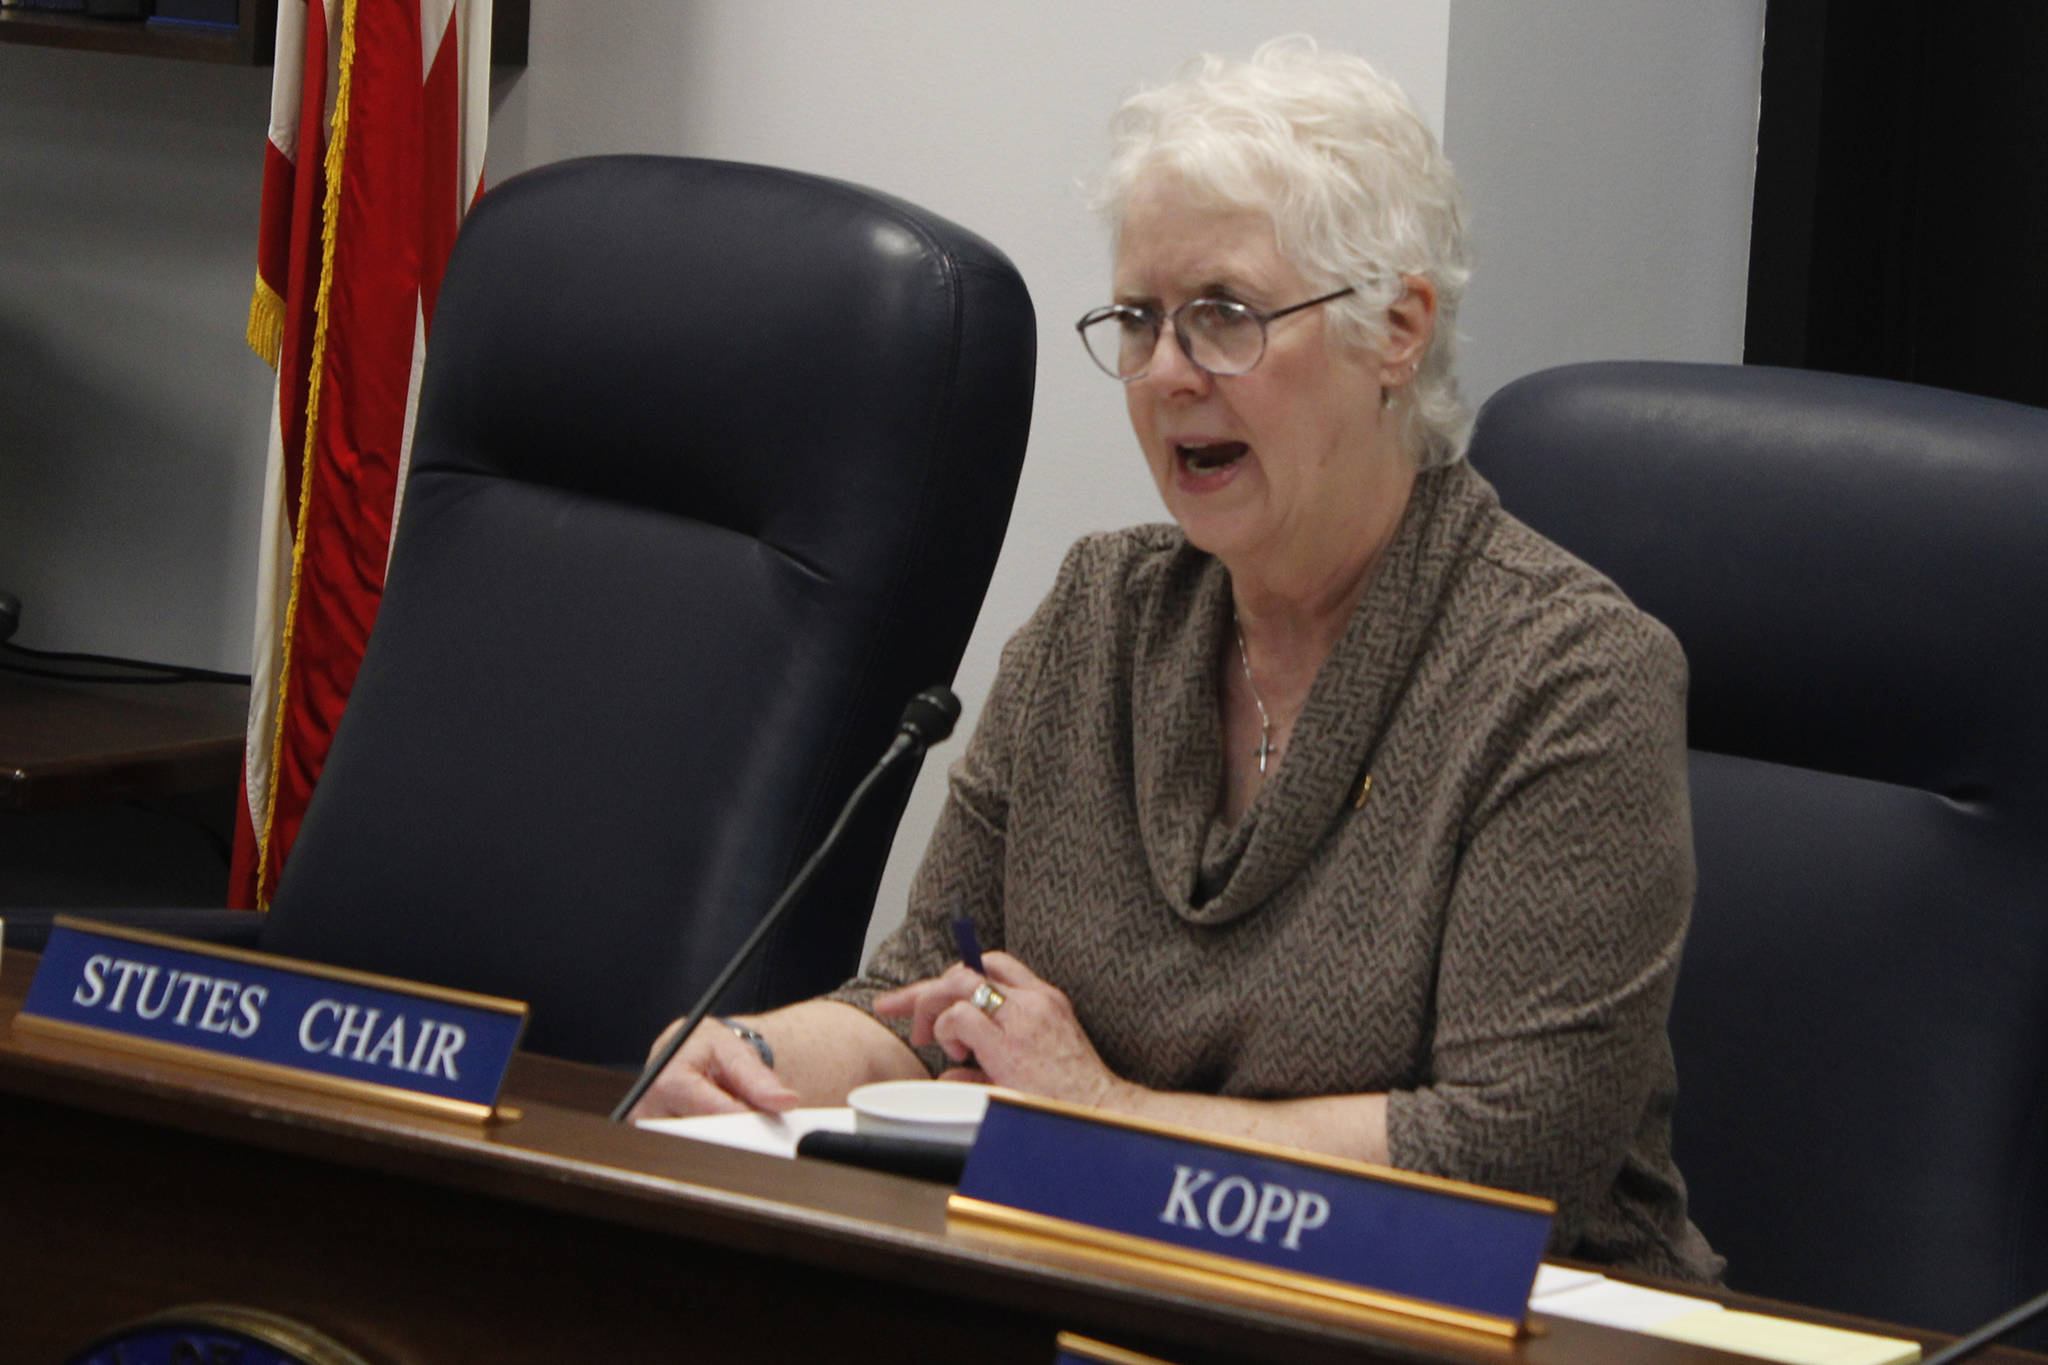 Rep. Louise Stutes, R-Kodiak and chair of the House Fisheries Committee, speaks during a meeting about transboundary mining on Tuesday, April 30, 2019. (Alex McCarthy | Juneau Empire)